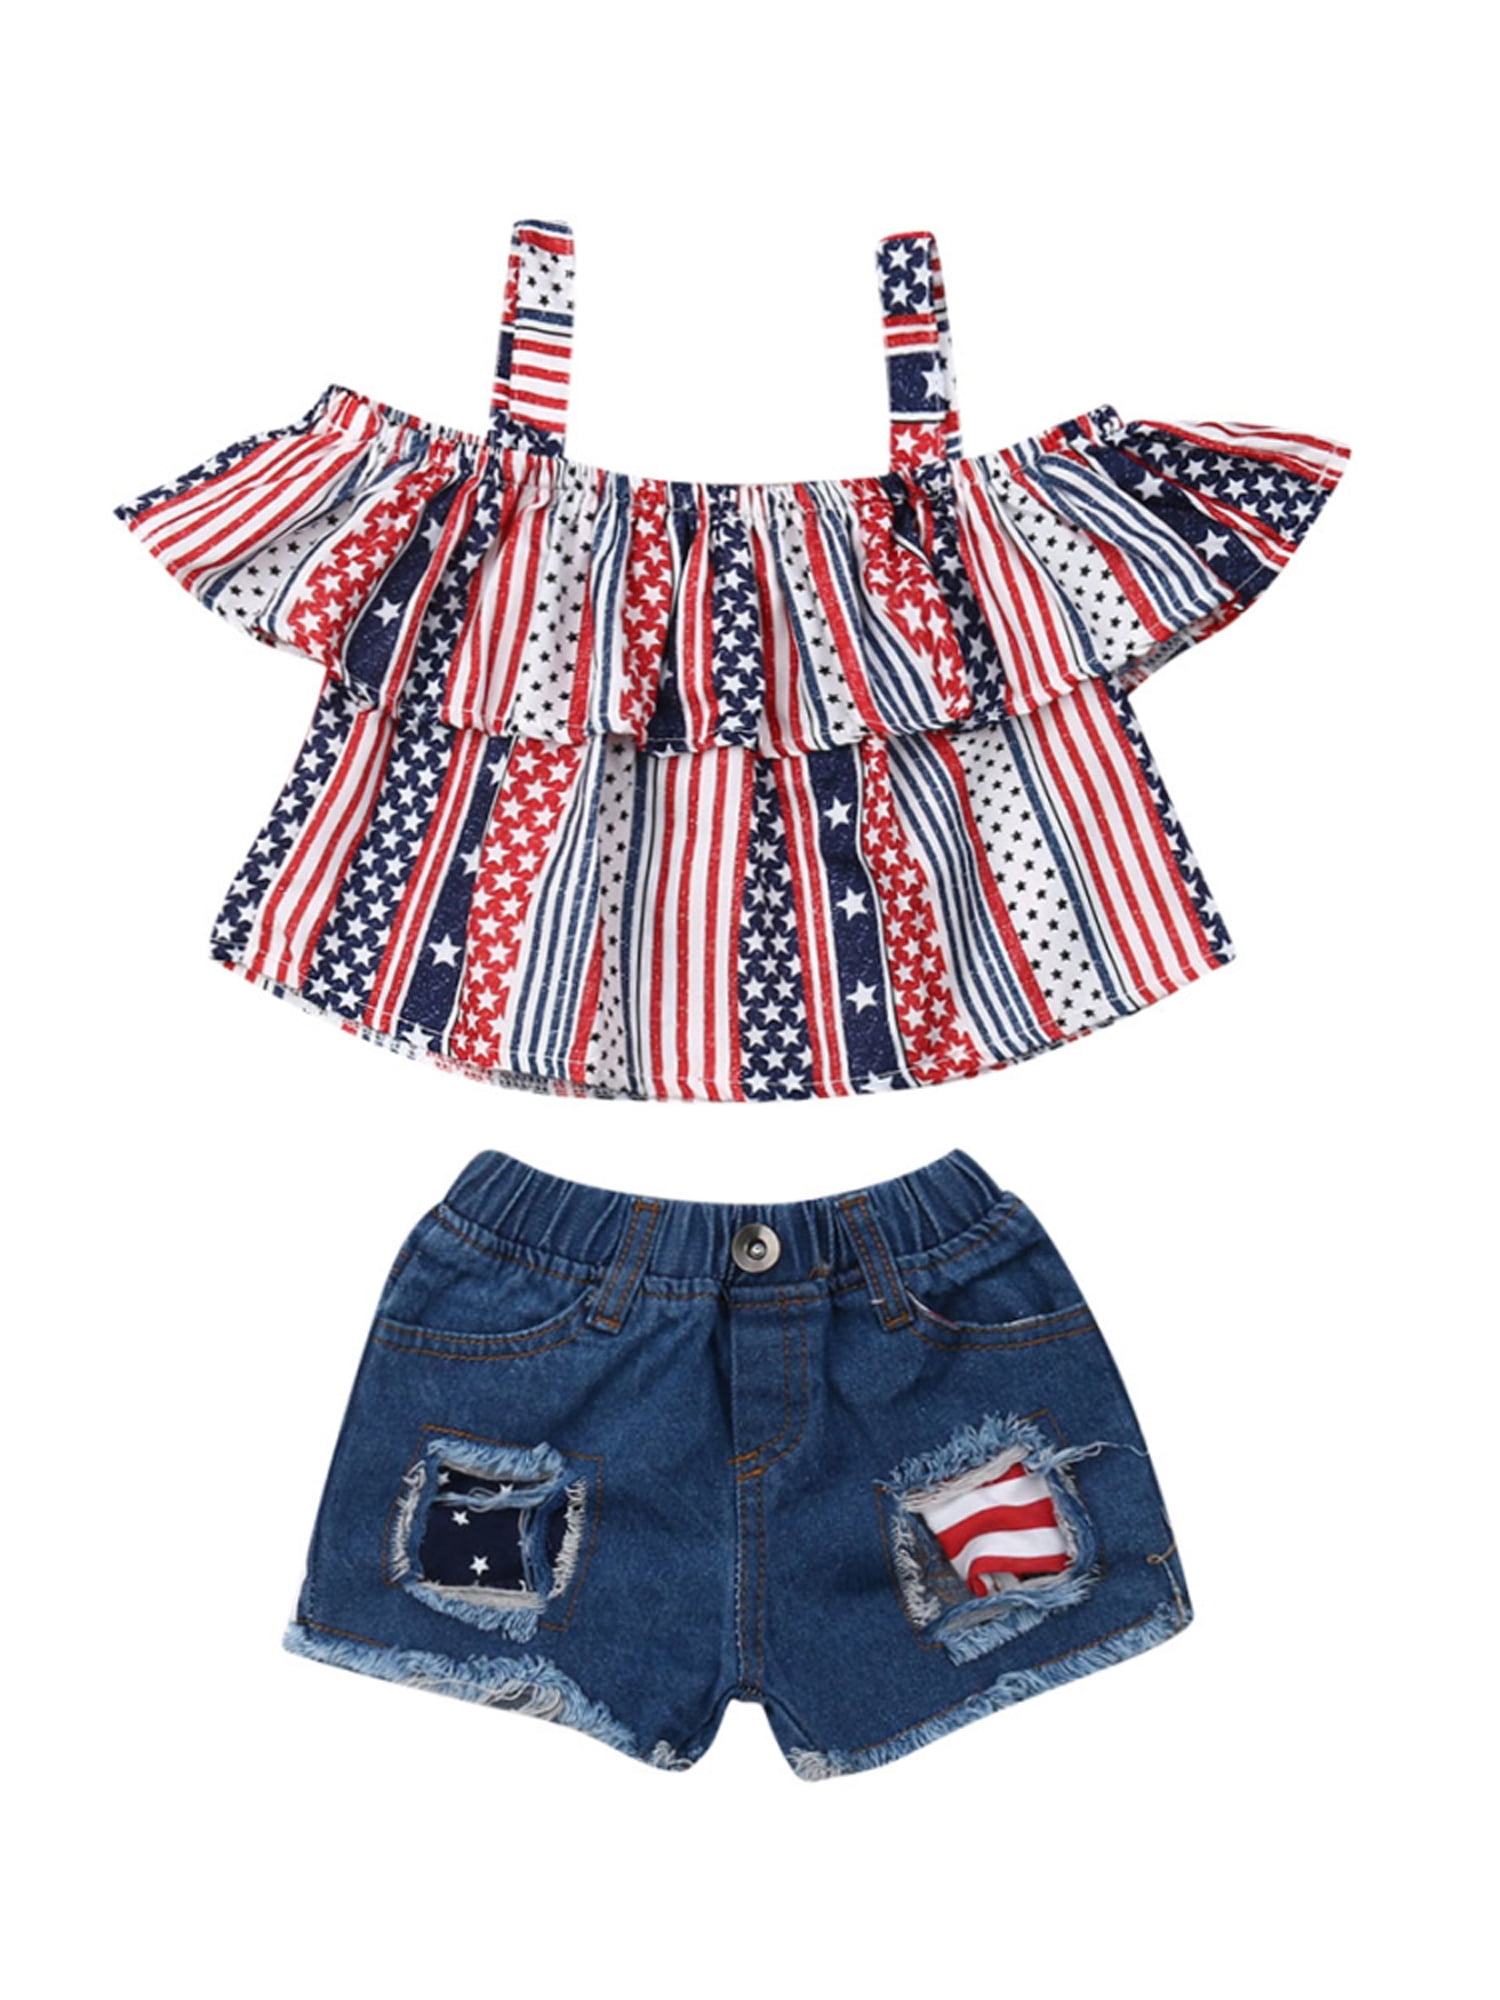 YOUNGER TREE 4th of July Toddler Baby Boy Summer Short Set American Flag Sleeveless Shirt Stripe Shorts 2Pcs Clothes